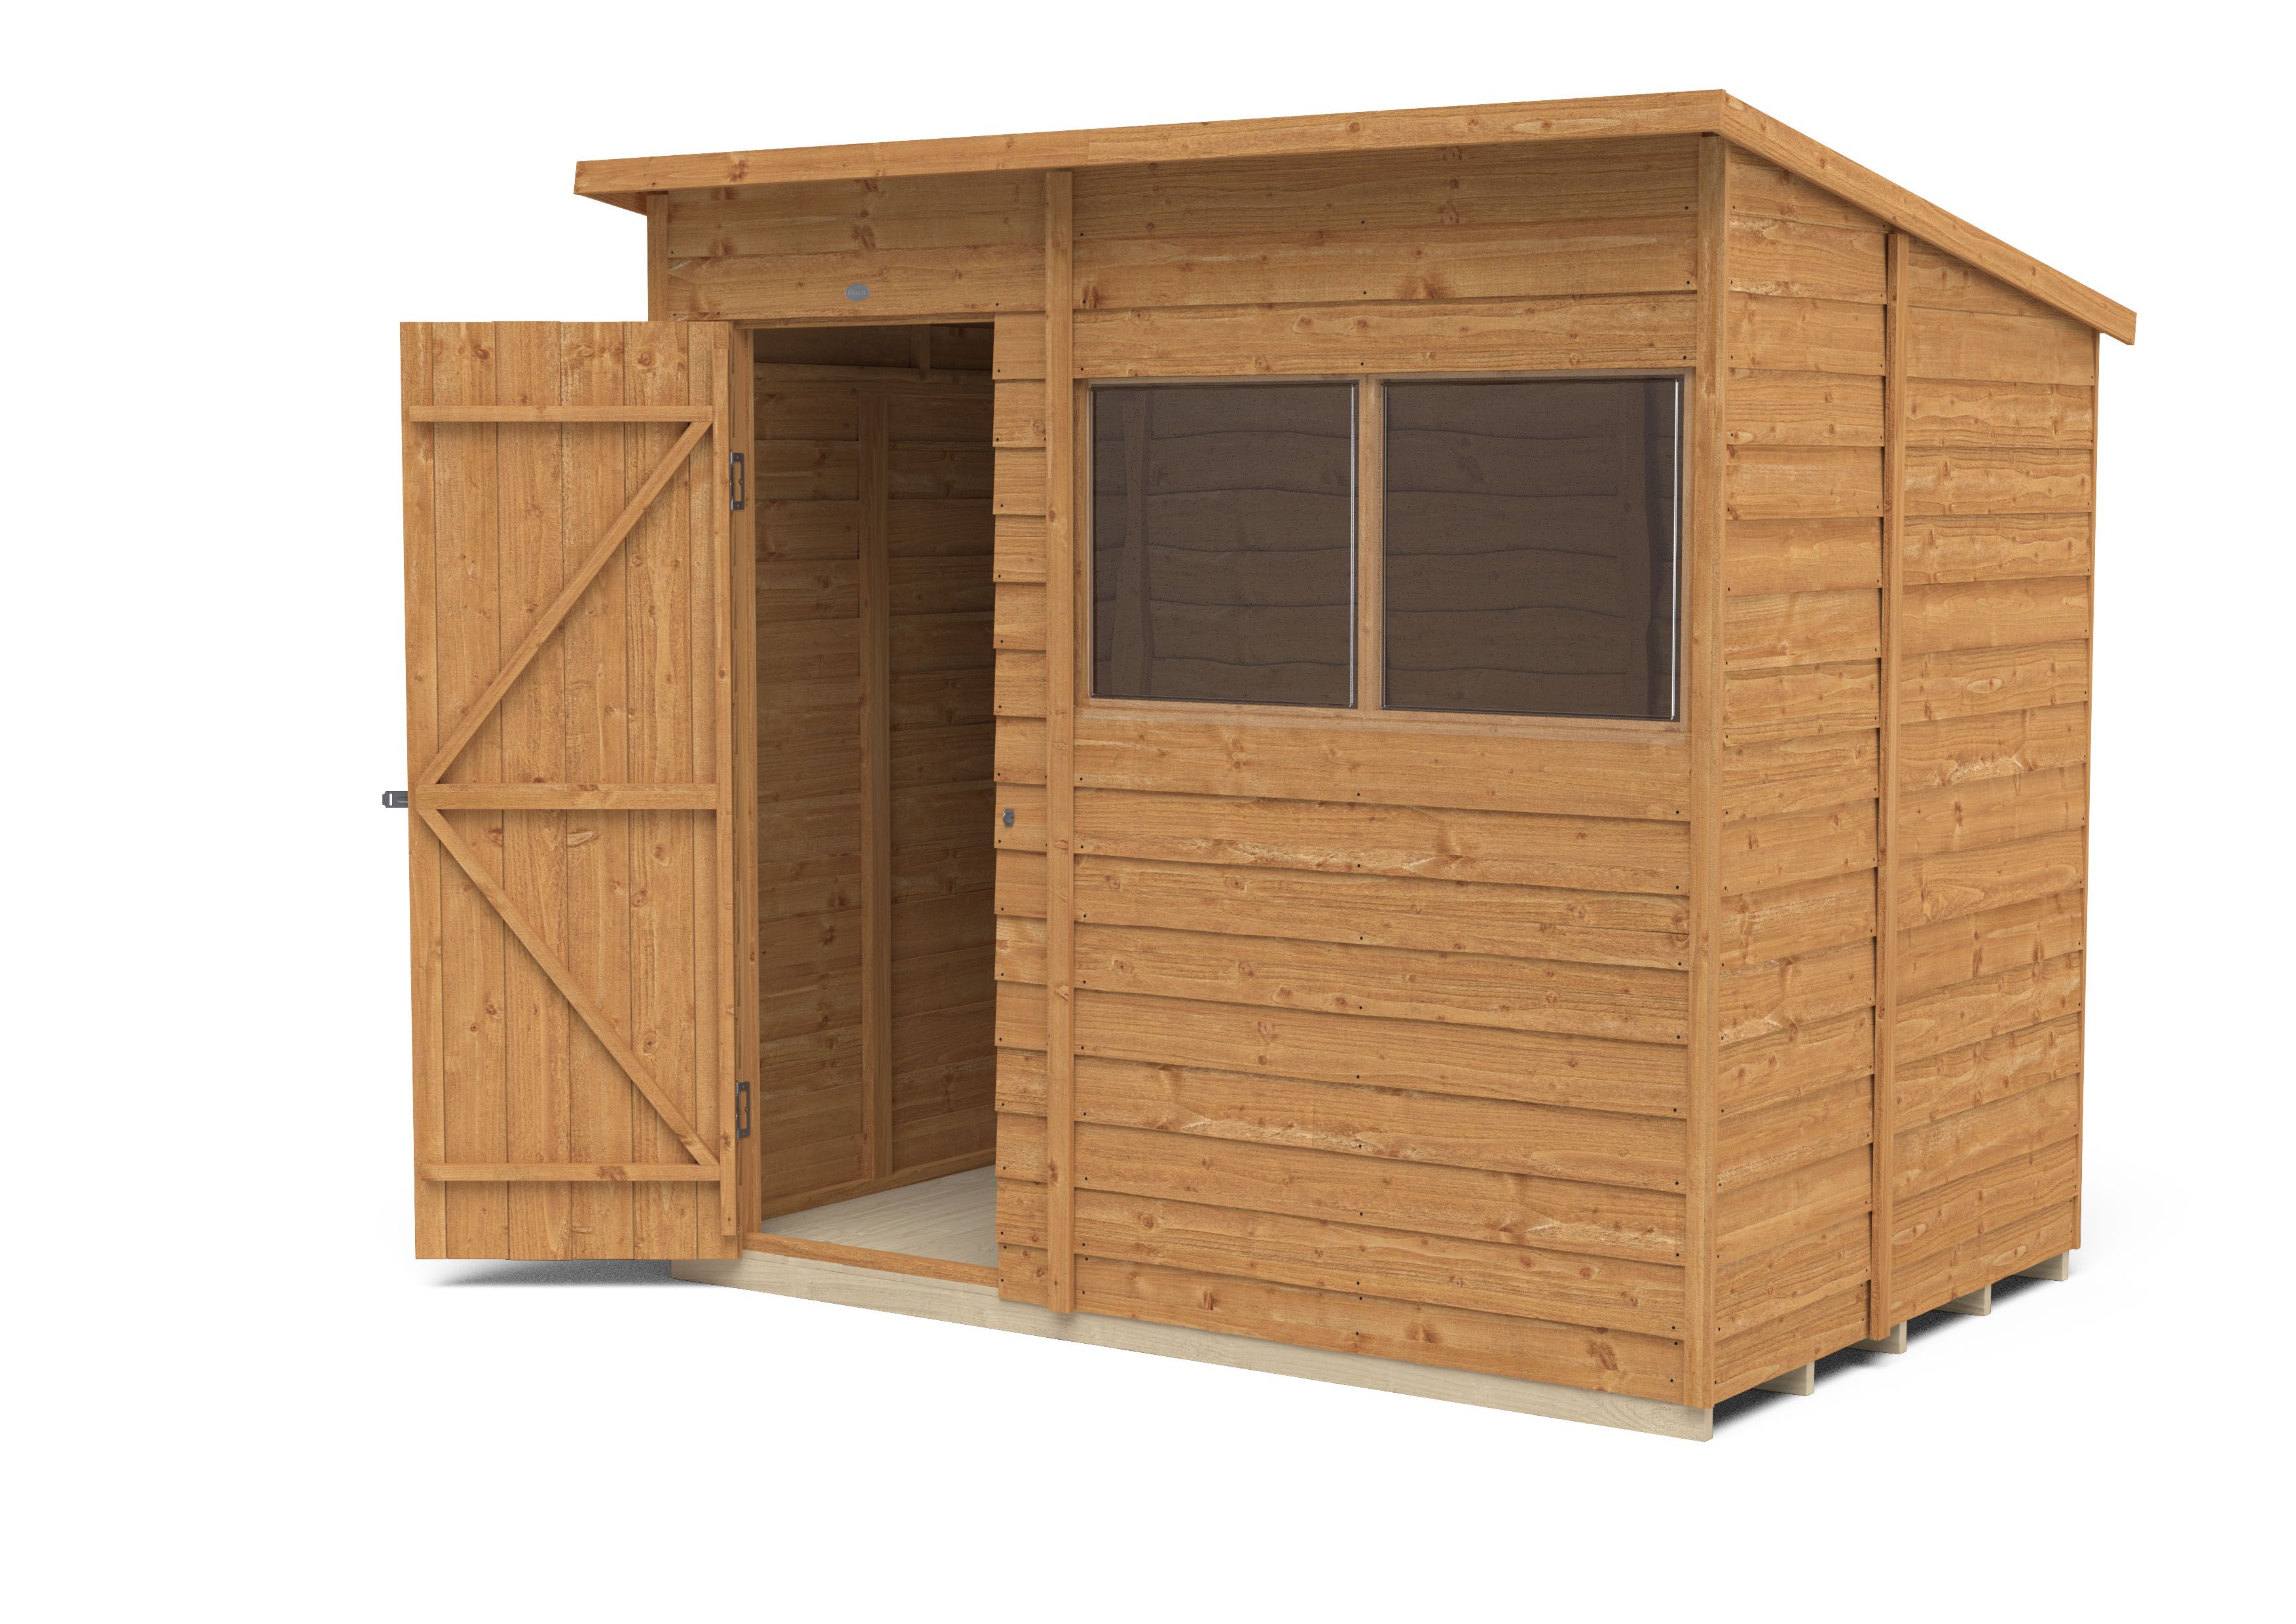 Forest Garden Overlap 7x5 ft Pent Wooden Dip treated Shed with floor & 2 windows (Base included)